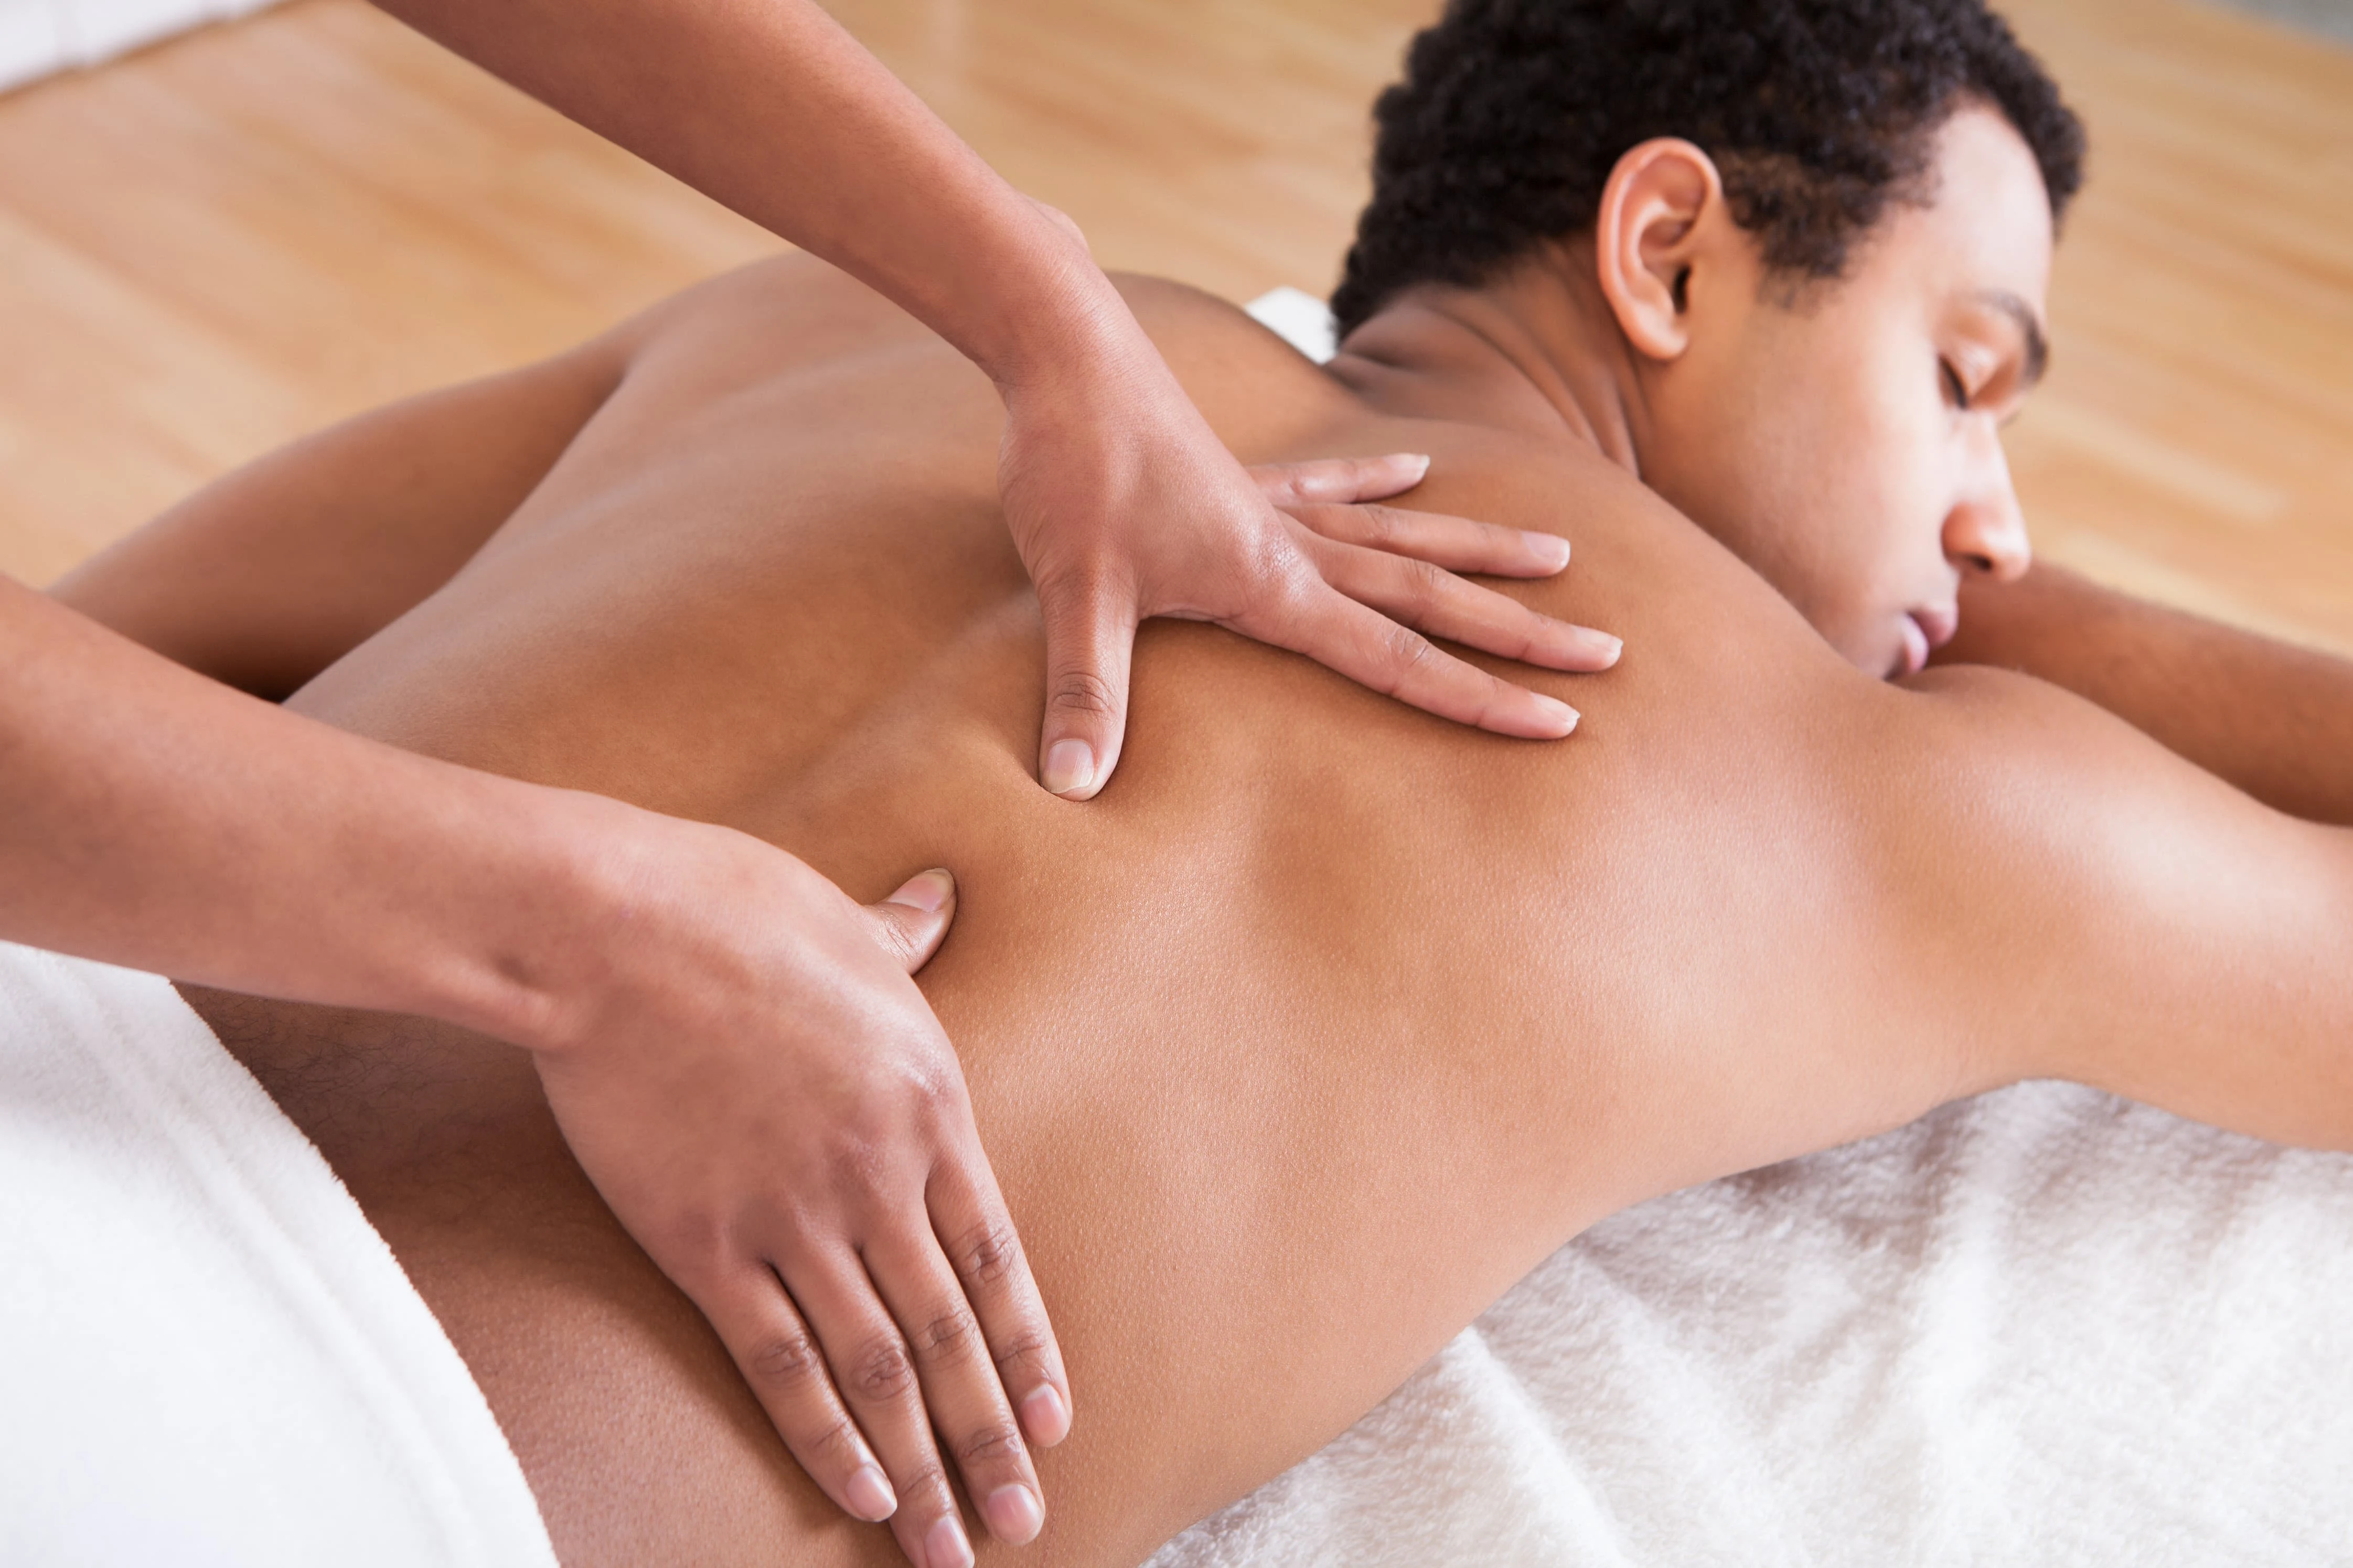 Massage-Lounge in Luxembourg, Europe | Massage Parlors,Sex-Friendly Places - Rated 0.4